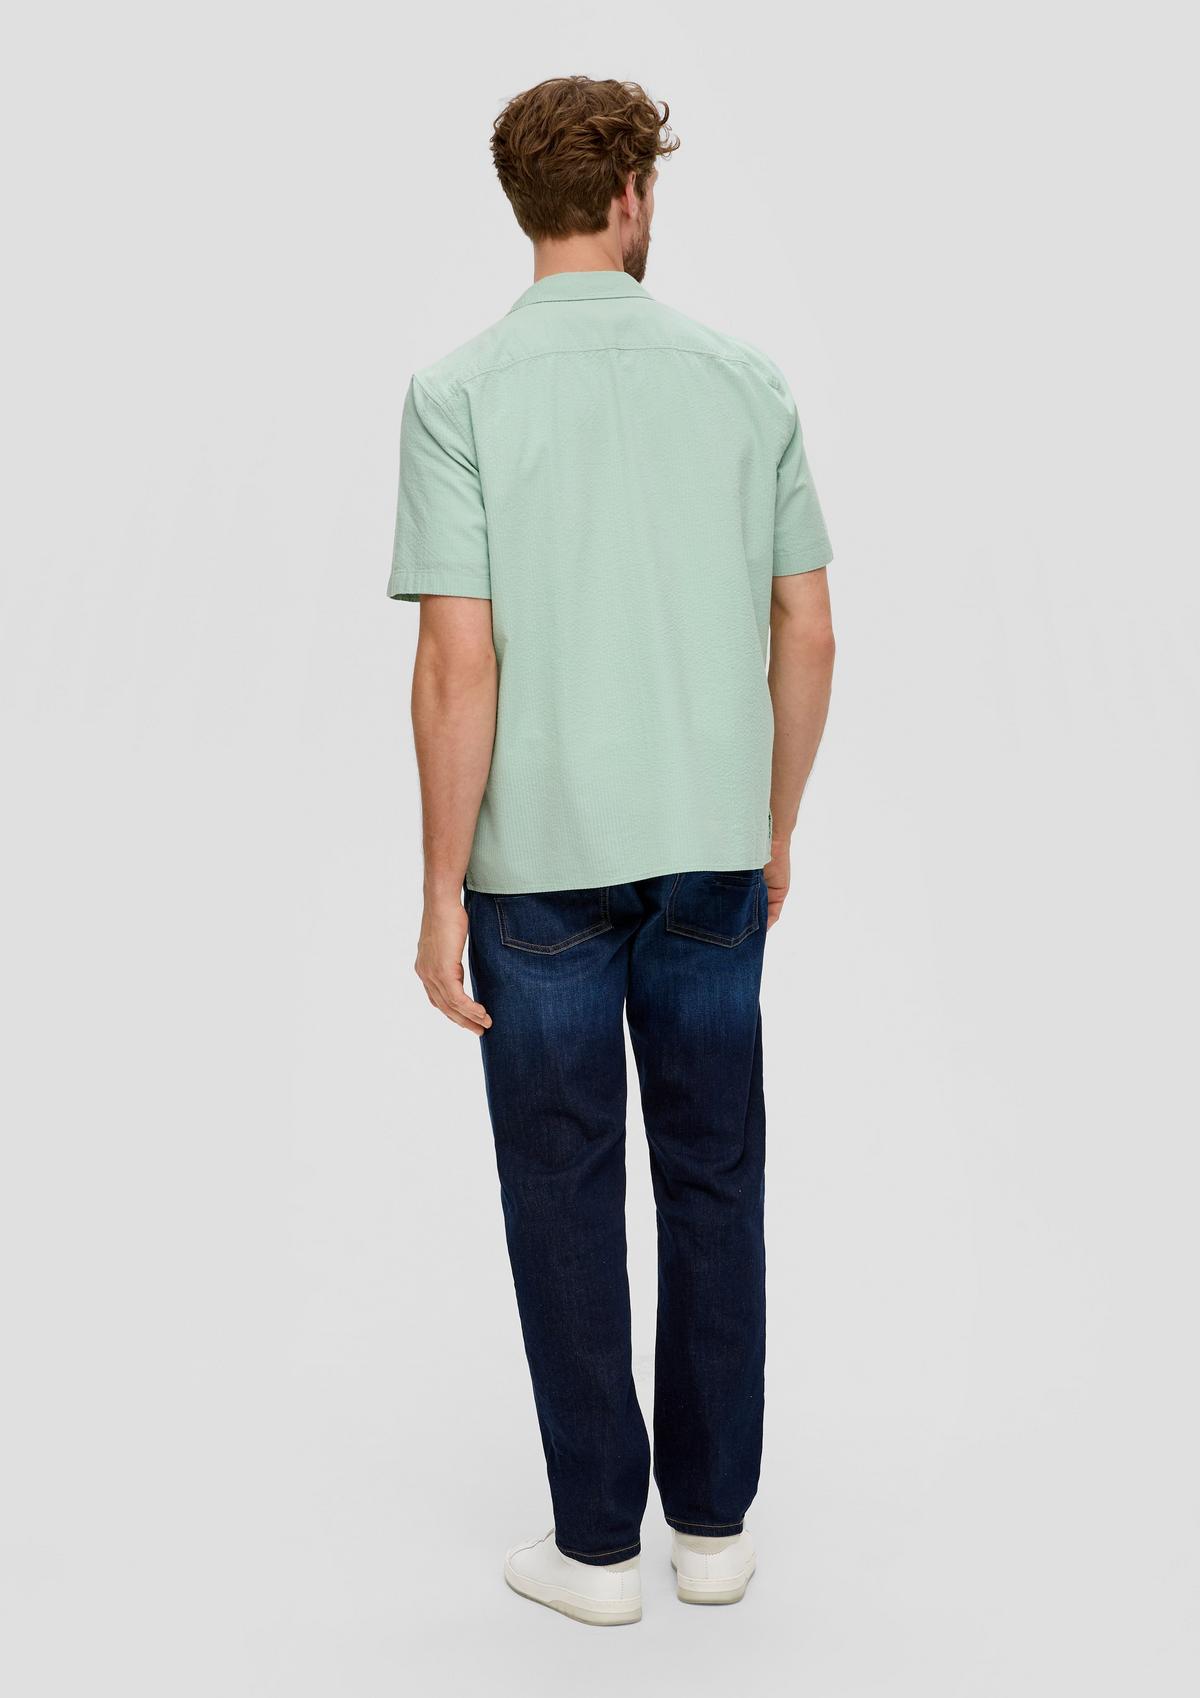 s.Oliver Short sleeve shirt with a crêpe texture